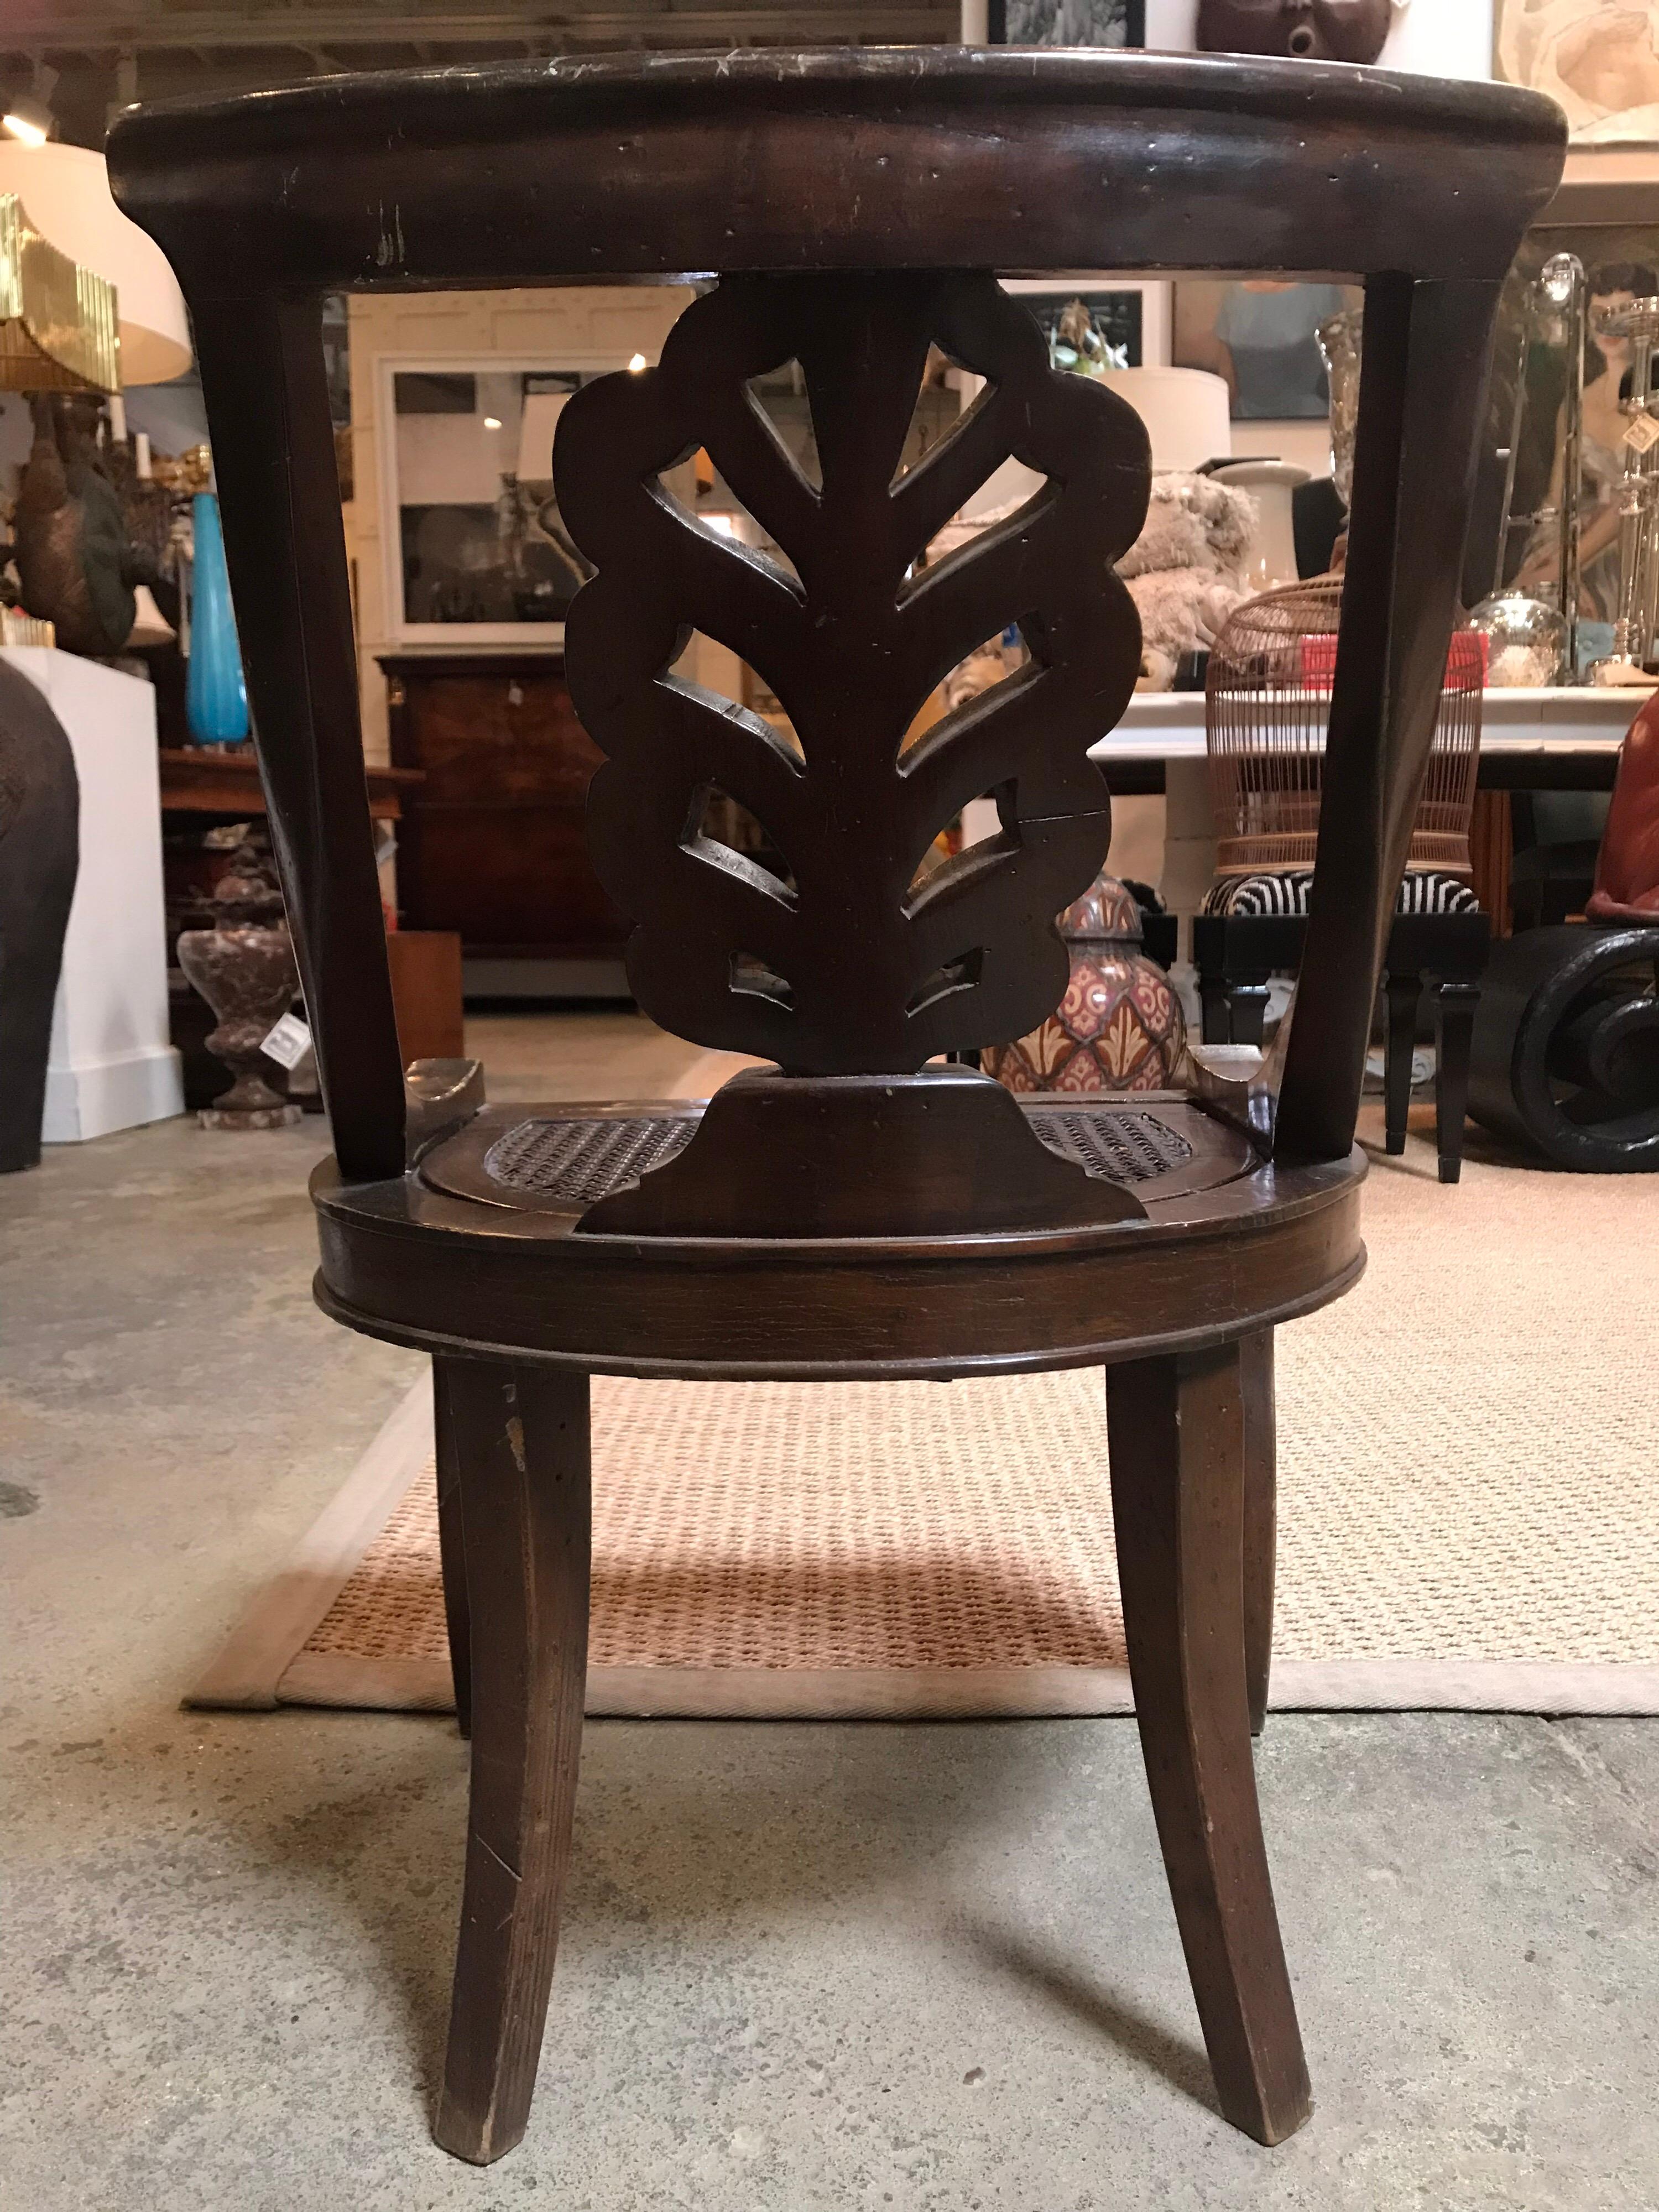 Portuguese Wooden Child's Chair